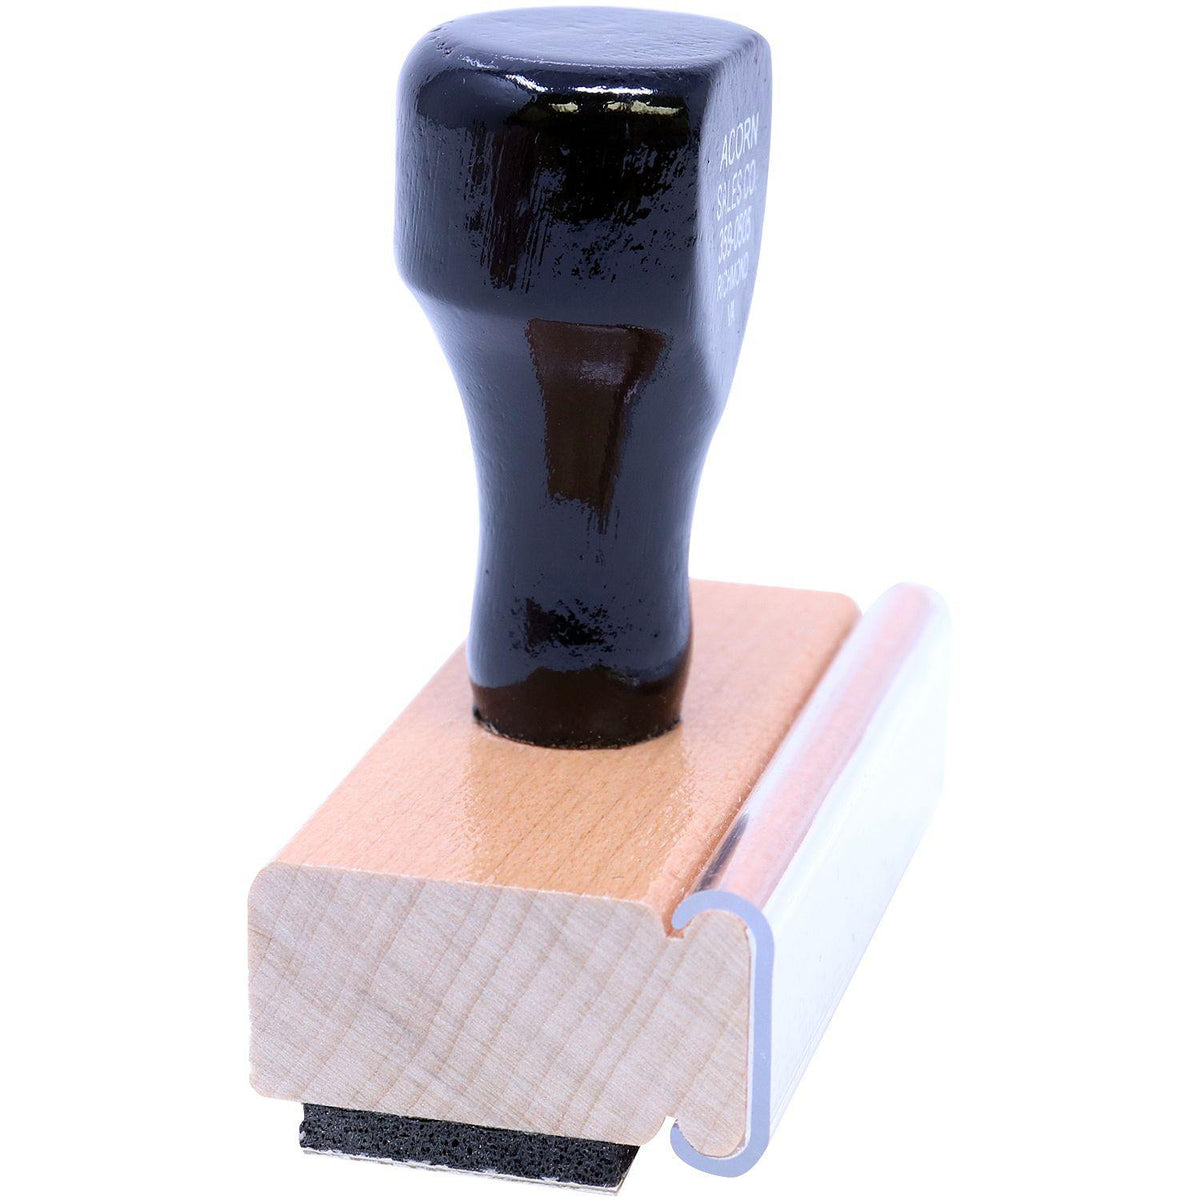 Side View of File Copy with Drawer Rubber Stamp at an Angle